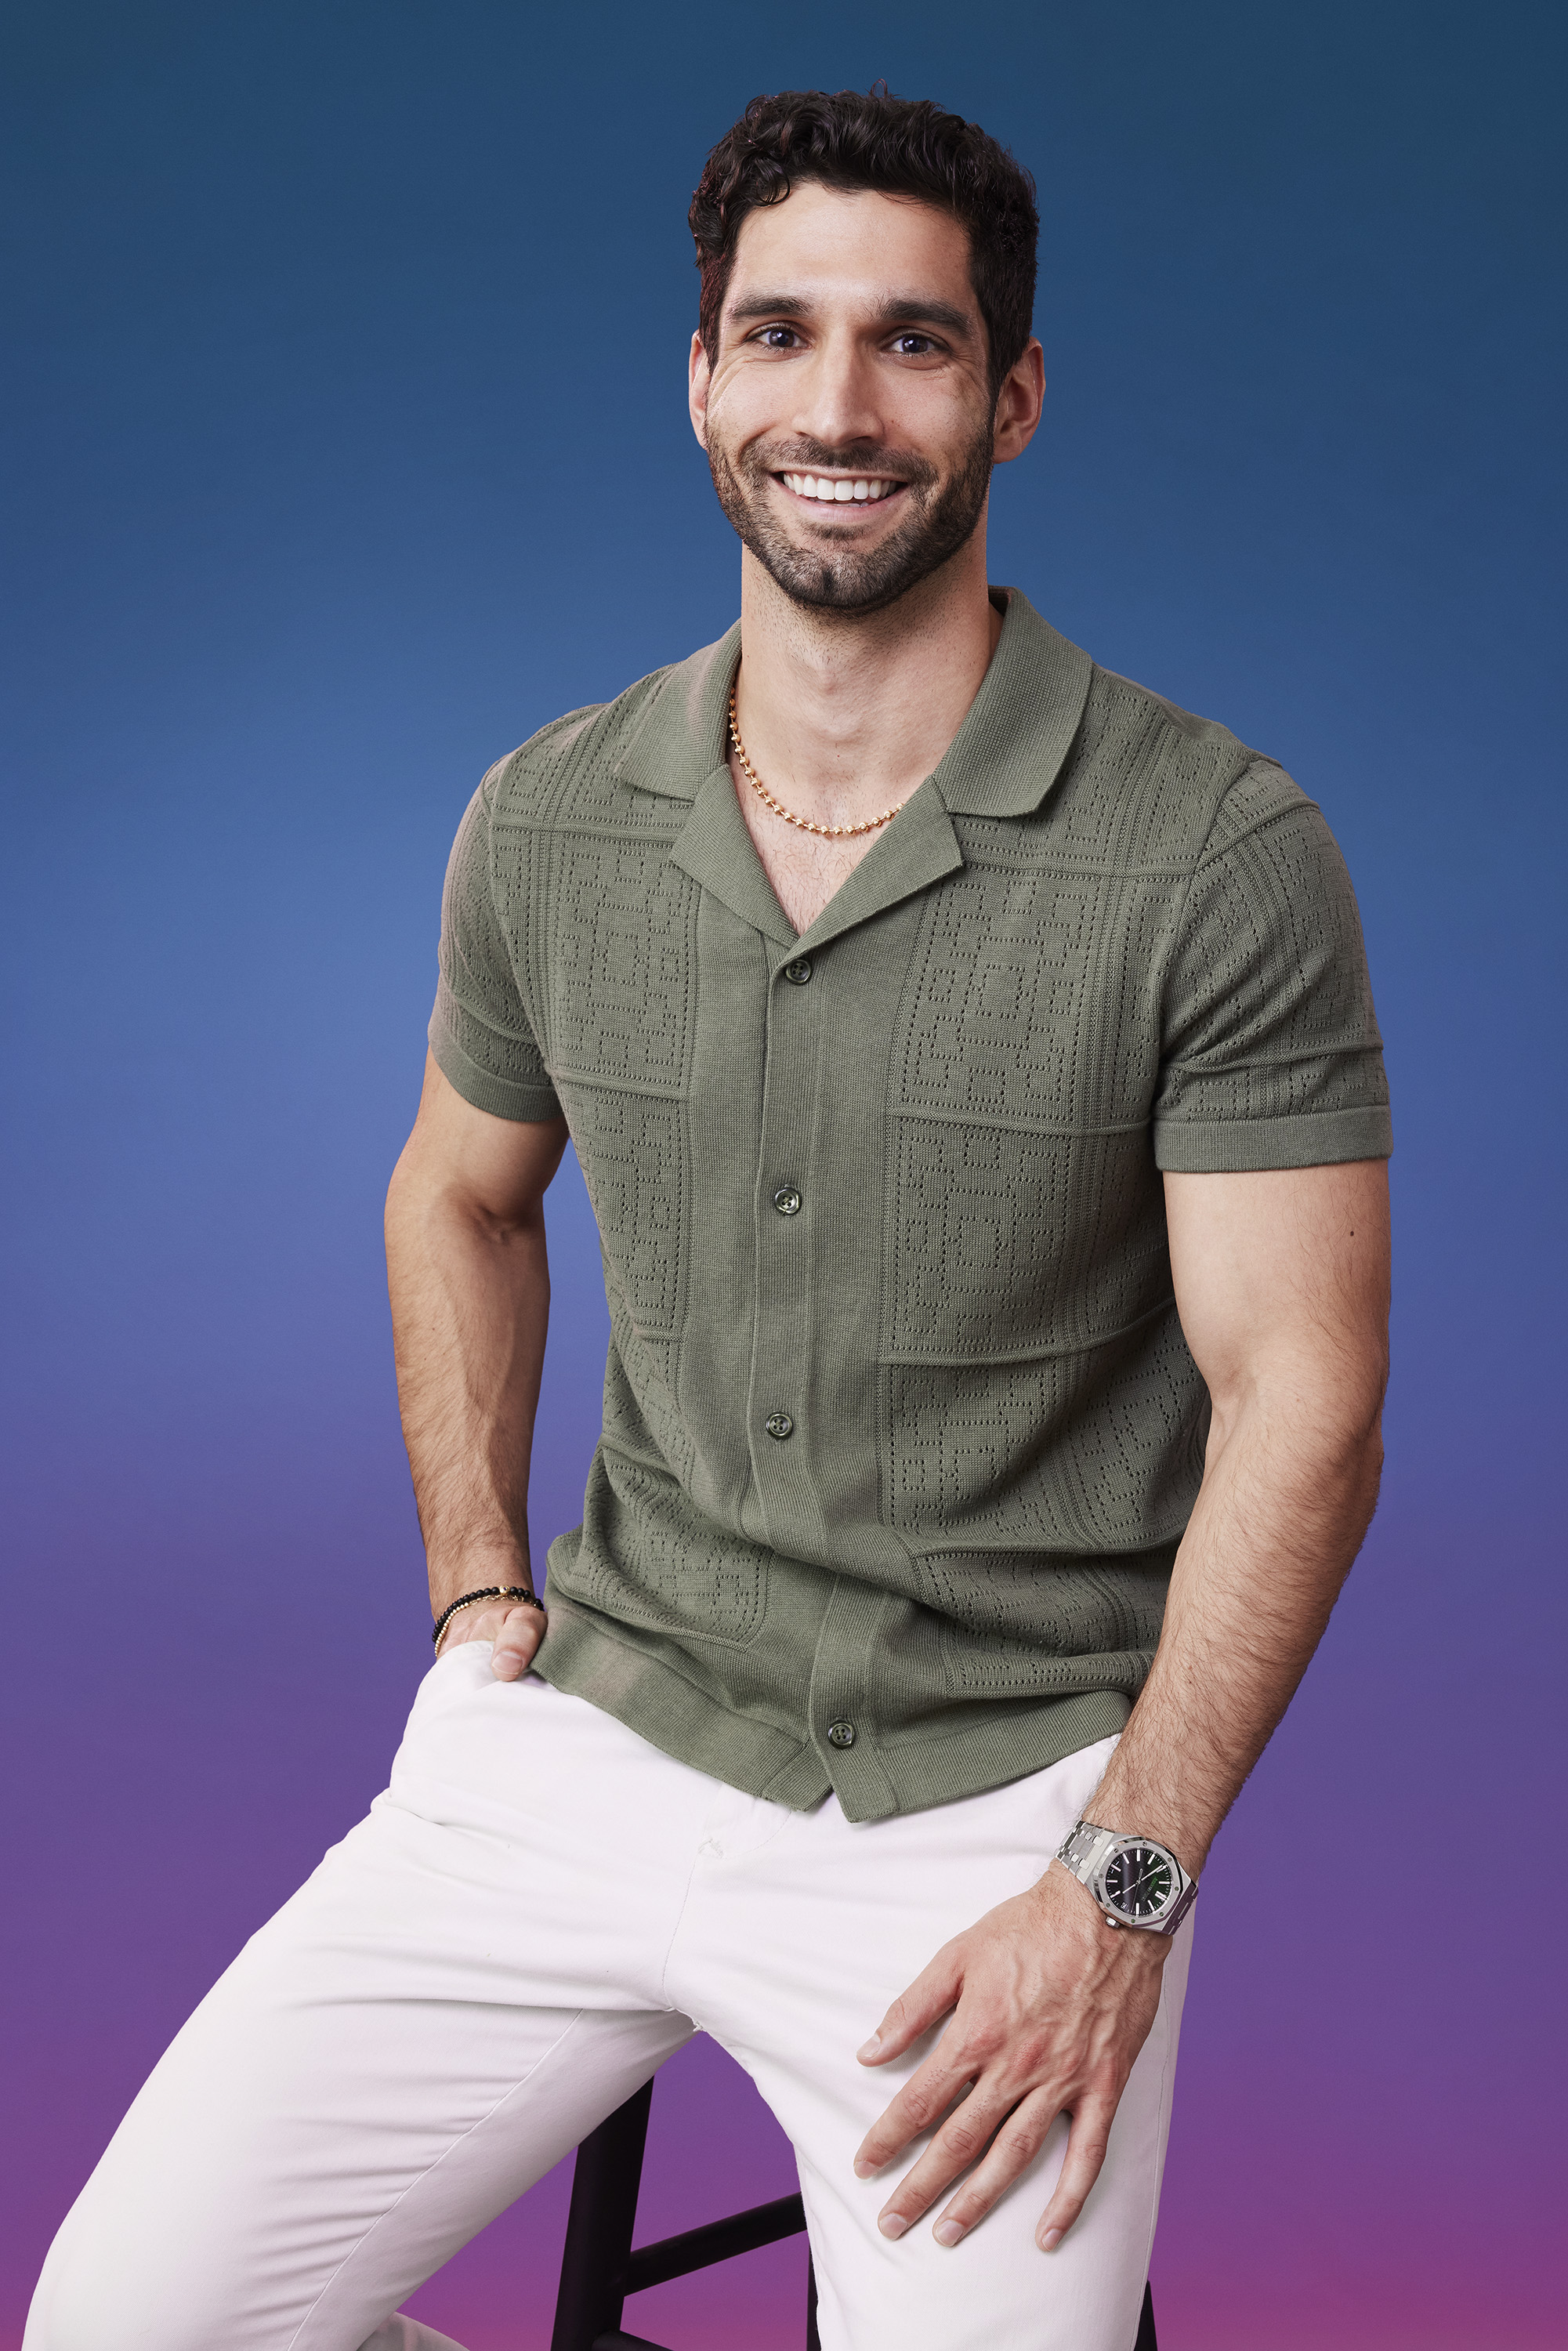 Jahaan, one of the Bachelorette Season 21 suitors